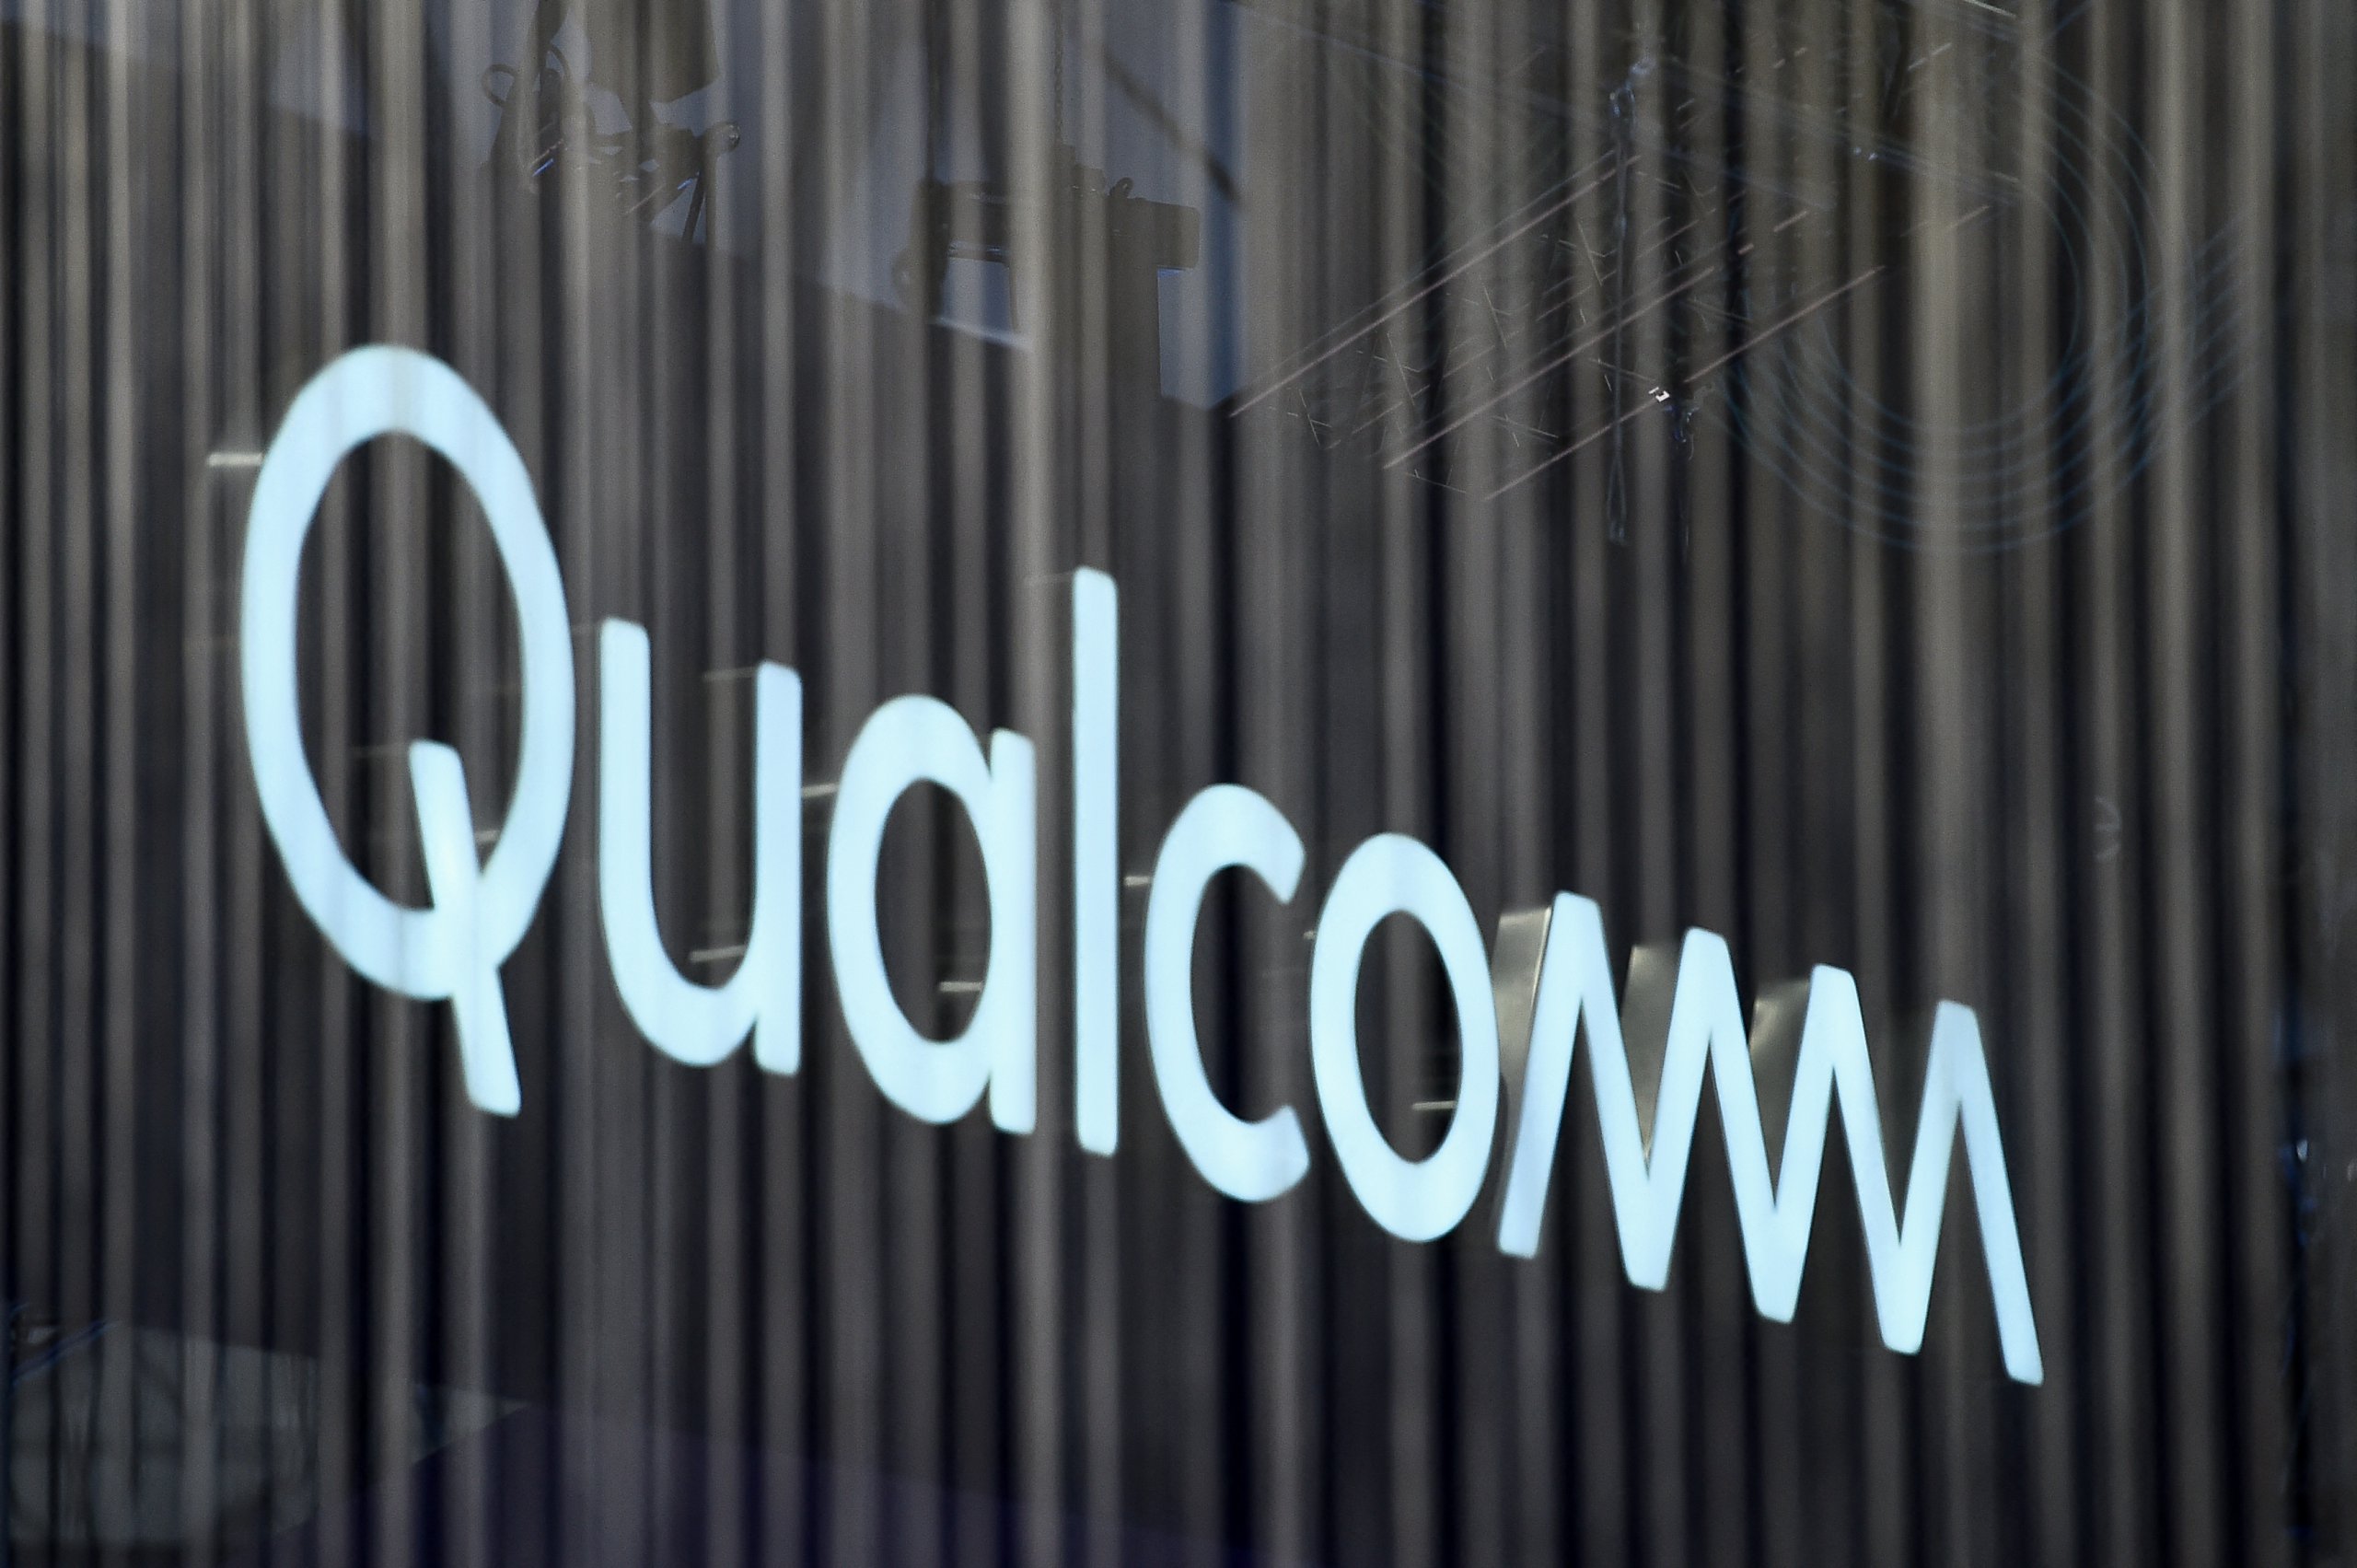 Qualcomm kickstarts collaboration with Android phones makers to enable satellite text messaging